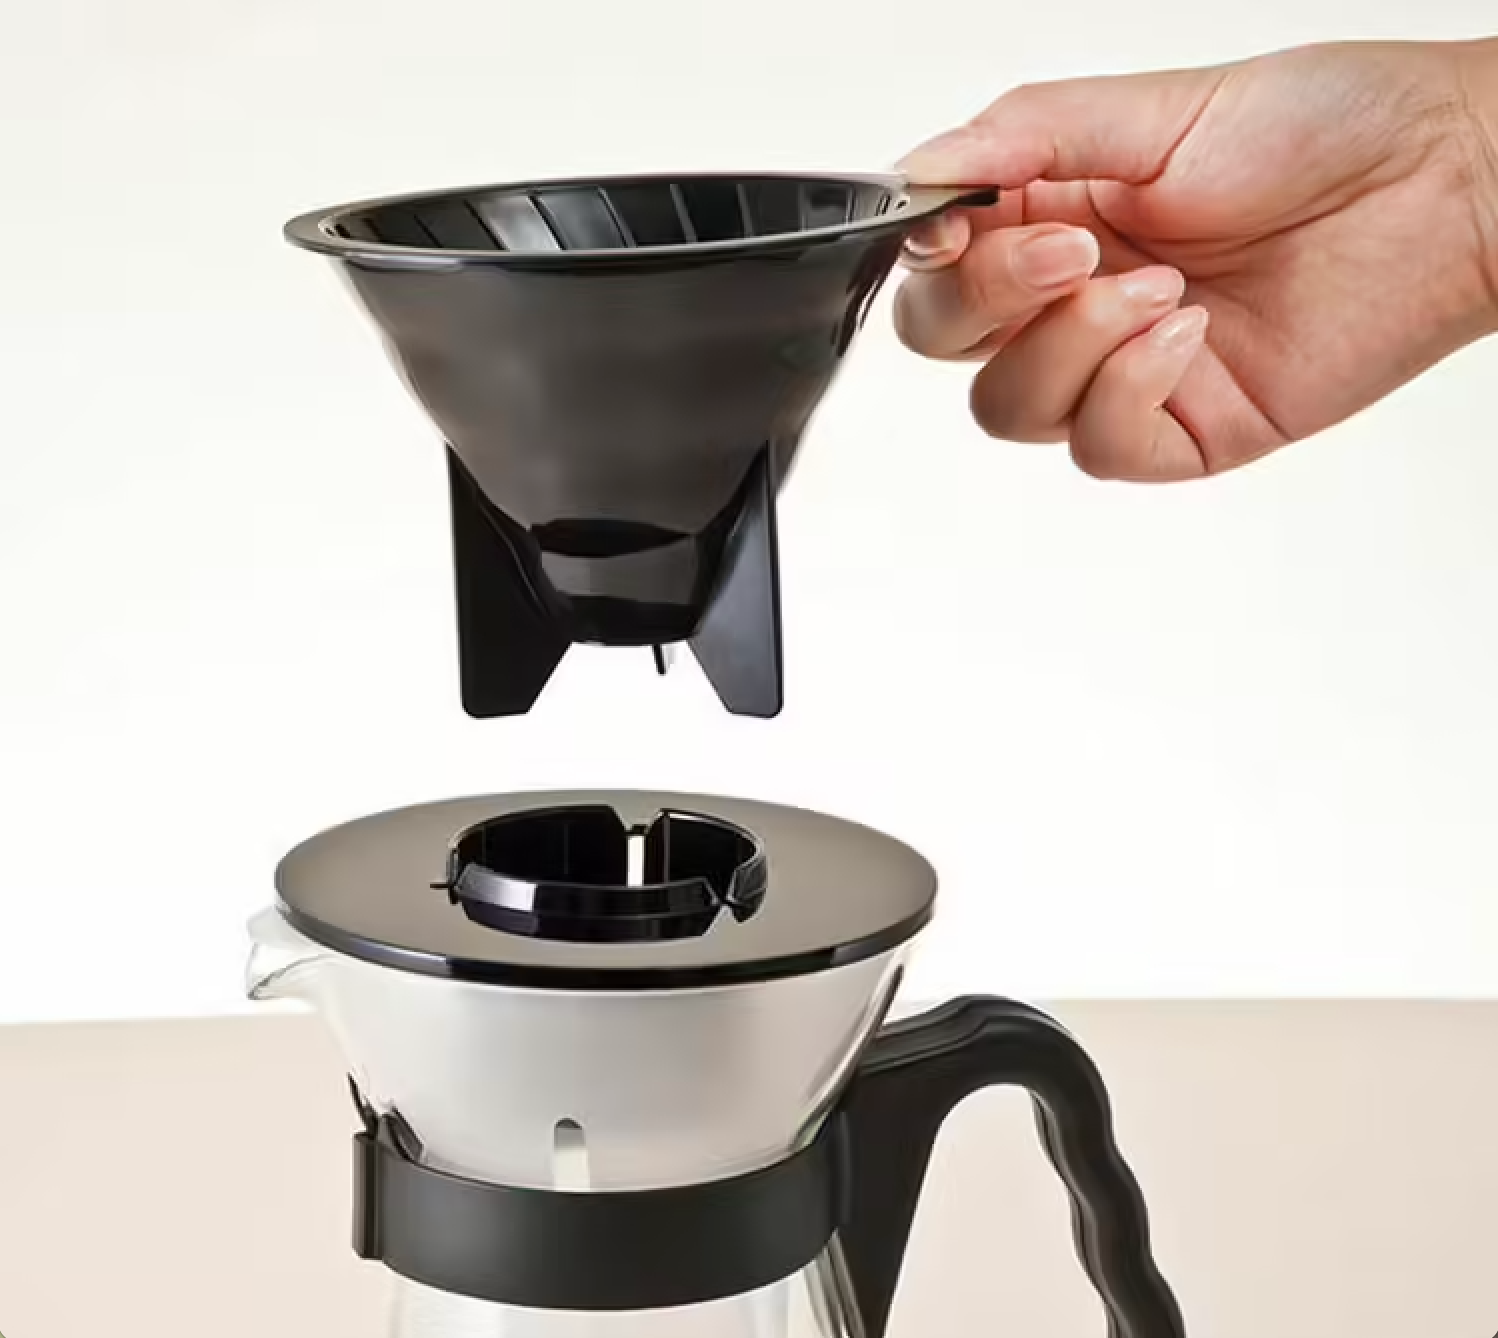 Hario V60 ice coffee maker 700ml for 2-4cups